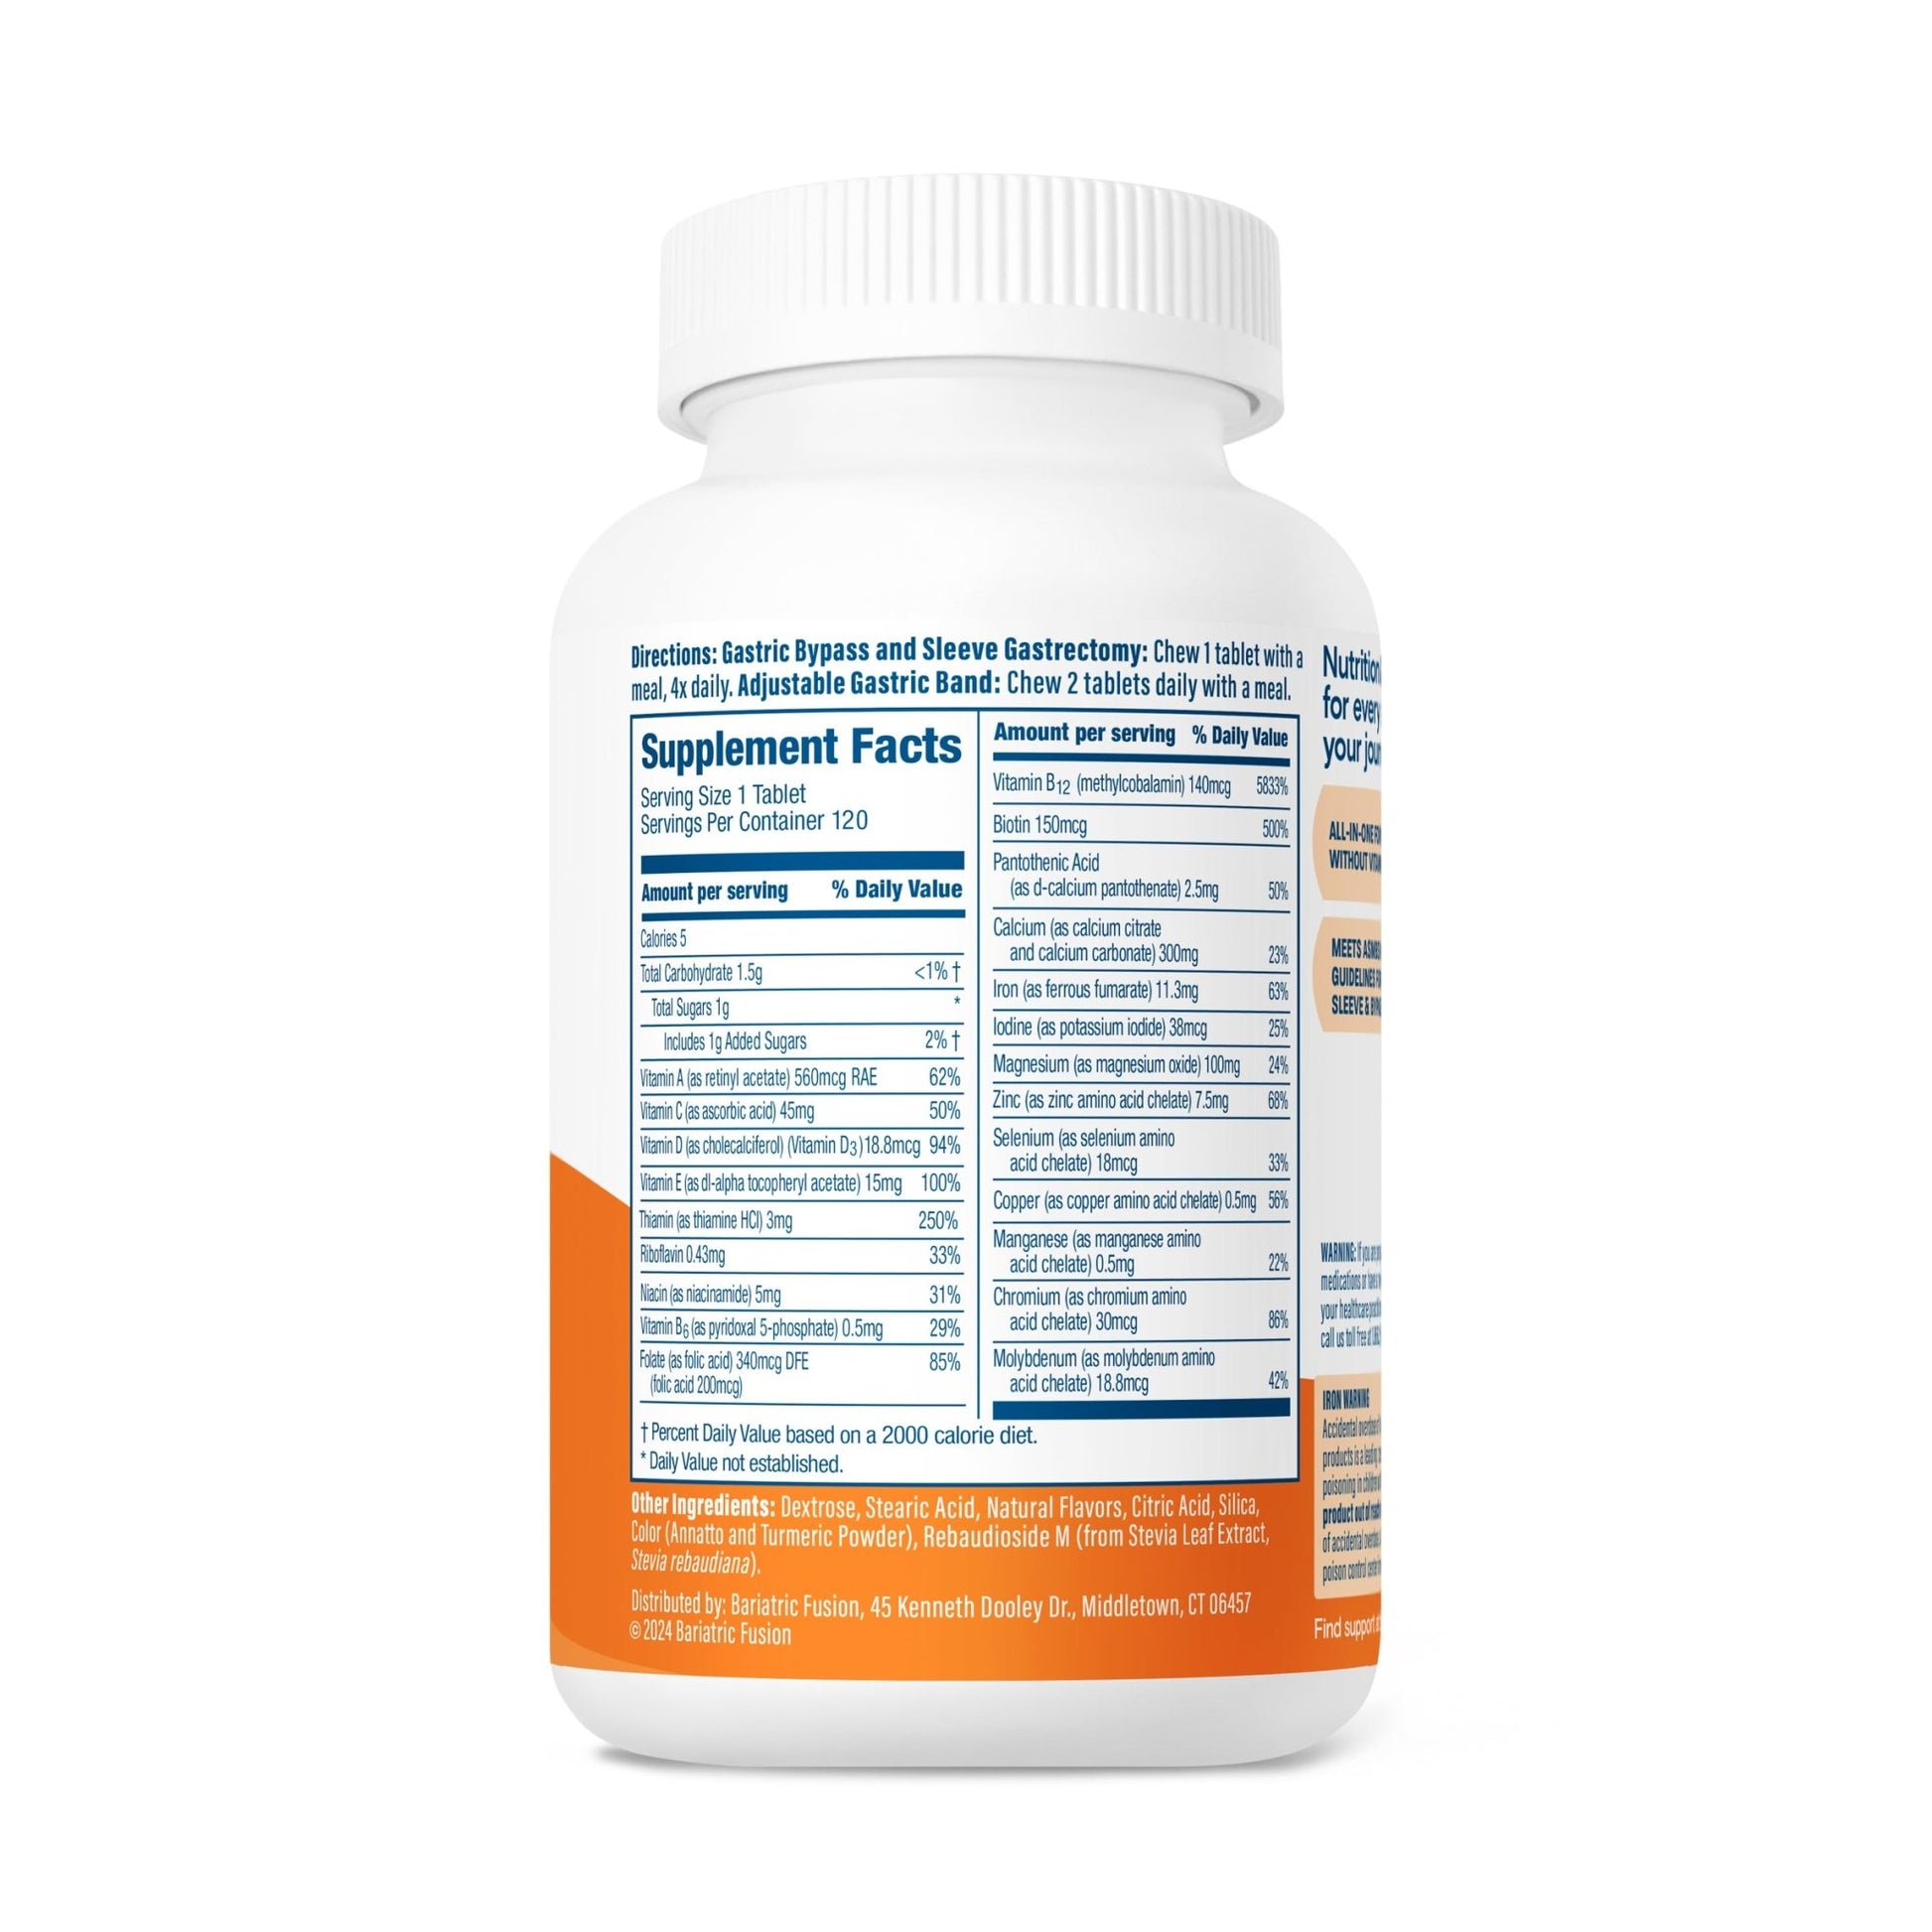 Bariatric Fusion Orange Cream Complete Chewable Bariatric Multivitamin directions, servings and ingredients.